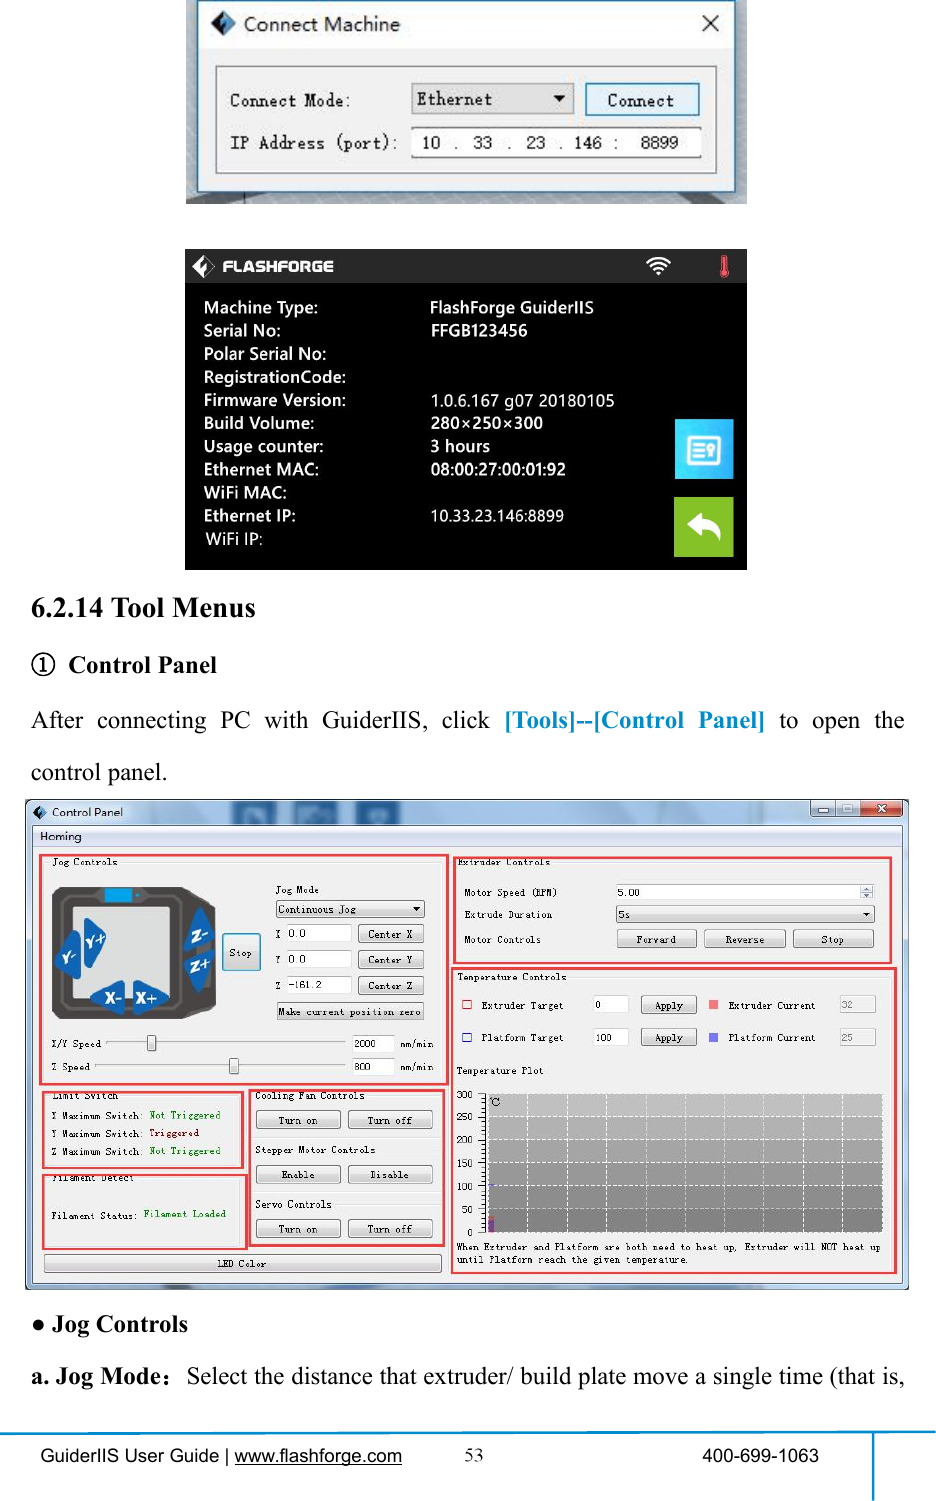 GuiderIIS User Guide | www.flashforge.com 400-699-10636.2.14 Tool Menus①Control PanelAfter connecting PC with GuiderIIS, click [Tools]--[Control Panel] to open thecontrol panel.●Jog Controlsa. Jog Mode：Select the distance that extruder/ build plate move a single time (that is,